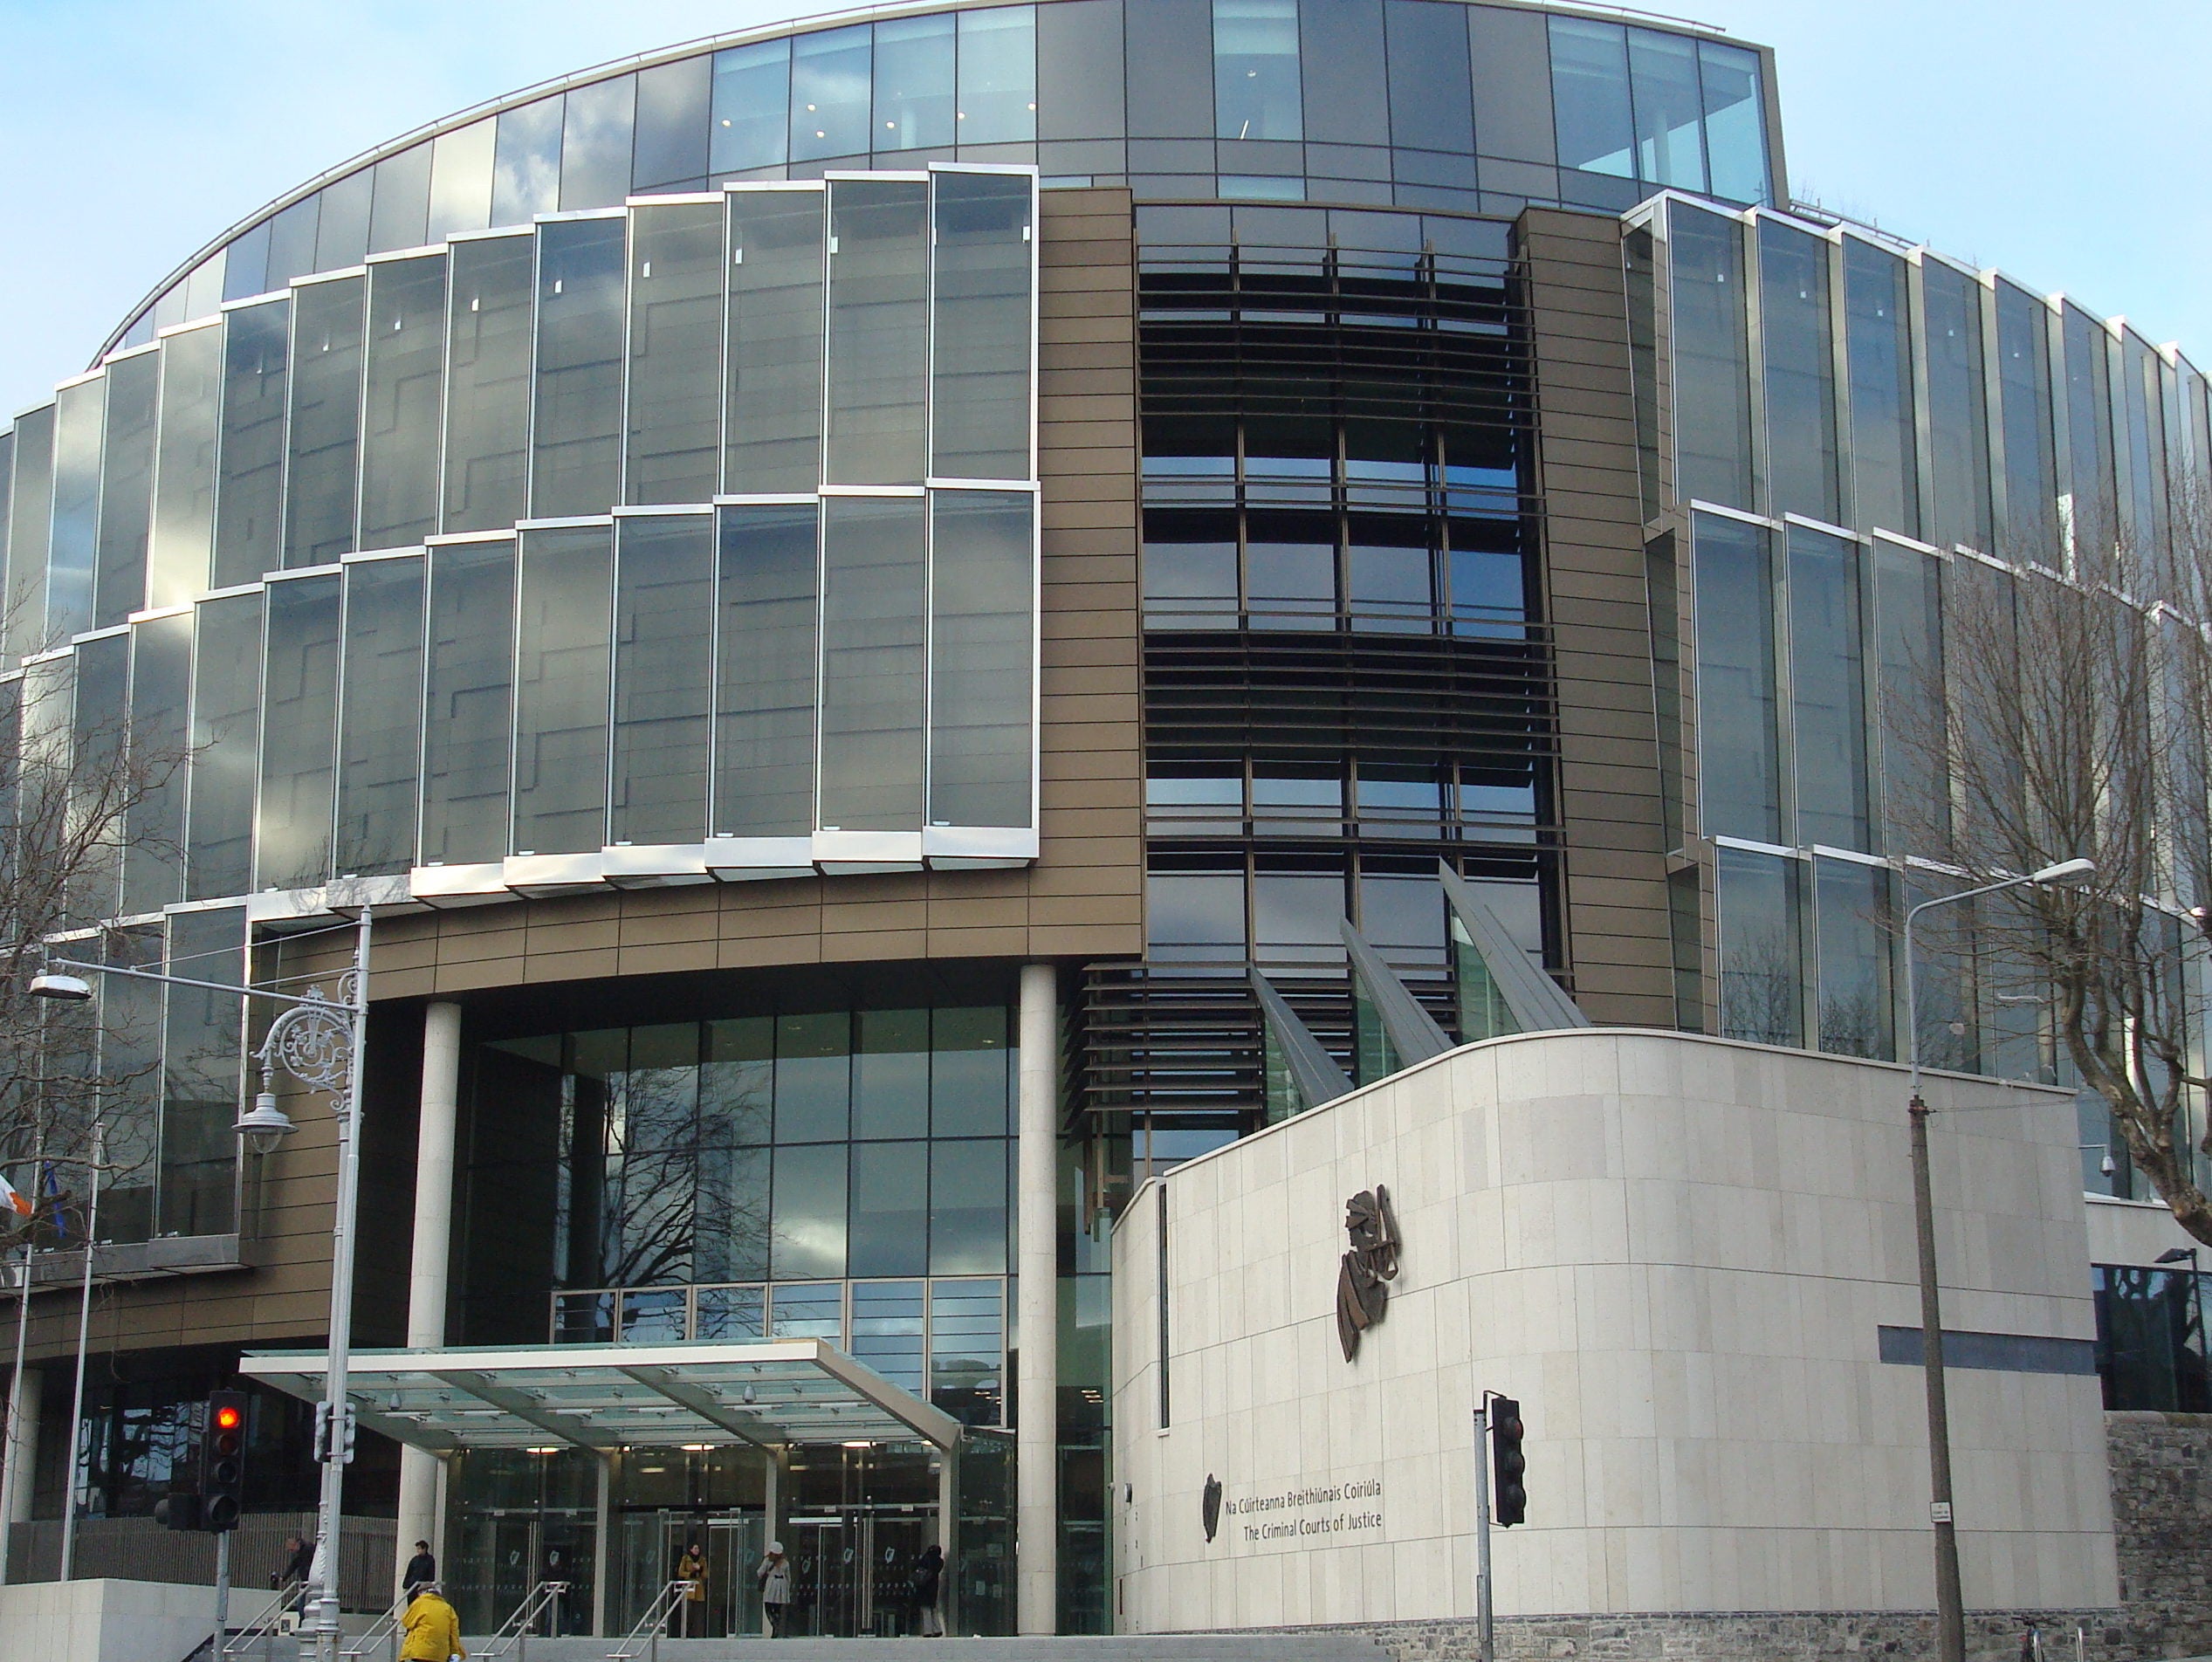 Irish journalists given formal access to court documents for first time to facilitate 'fair and accurate' reporting